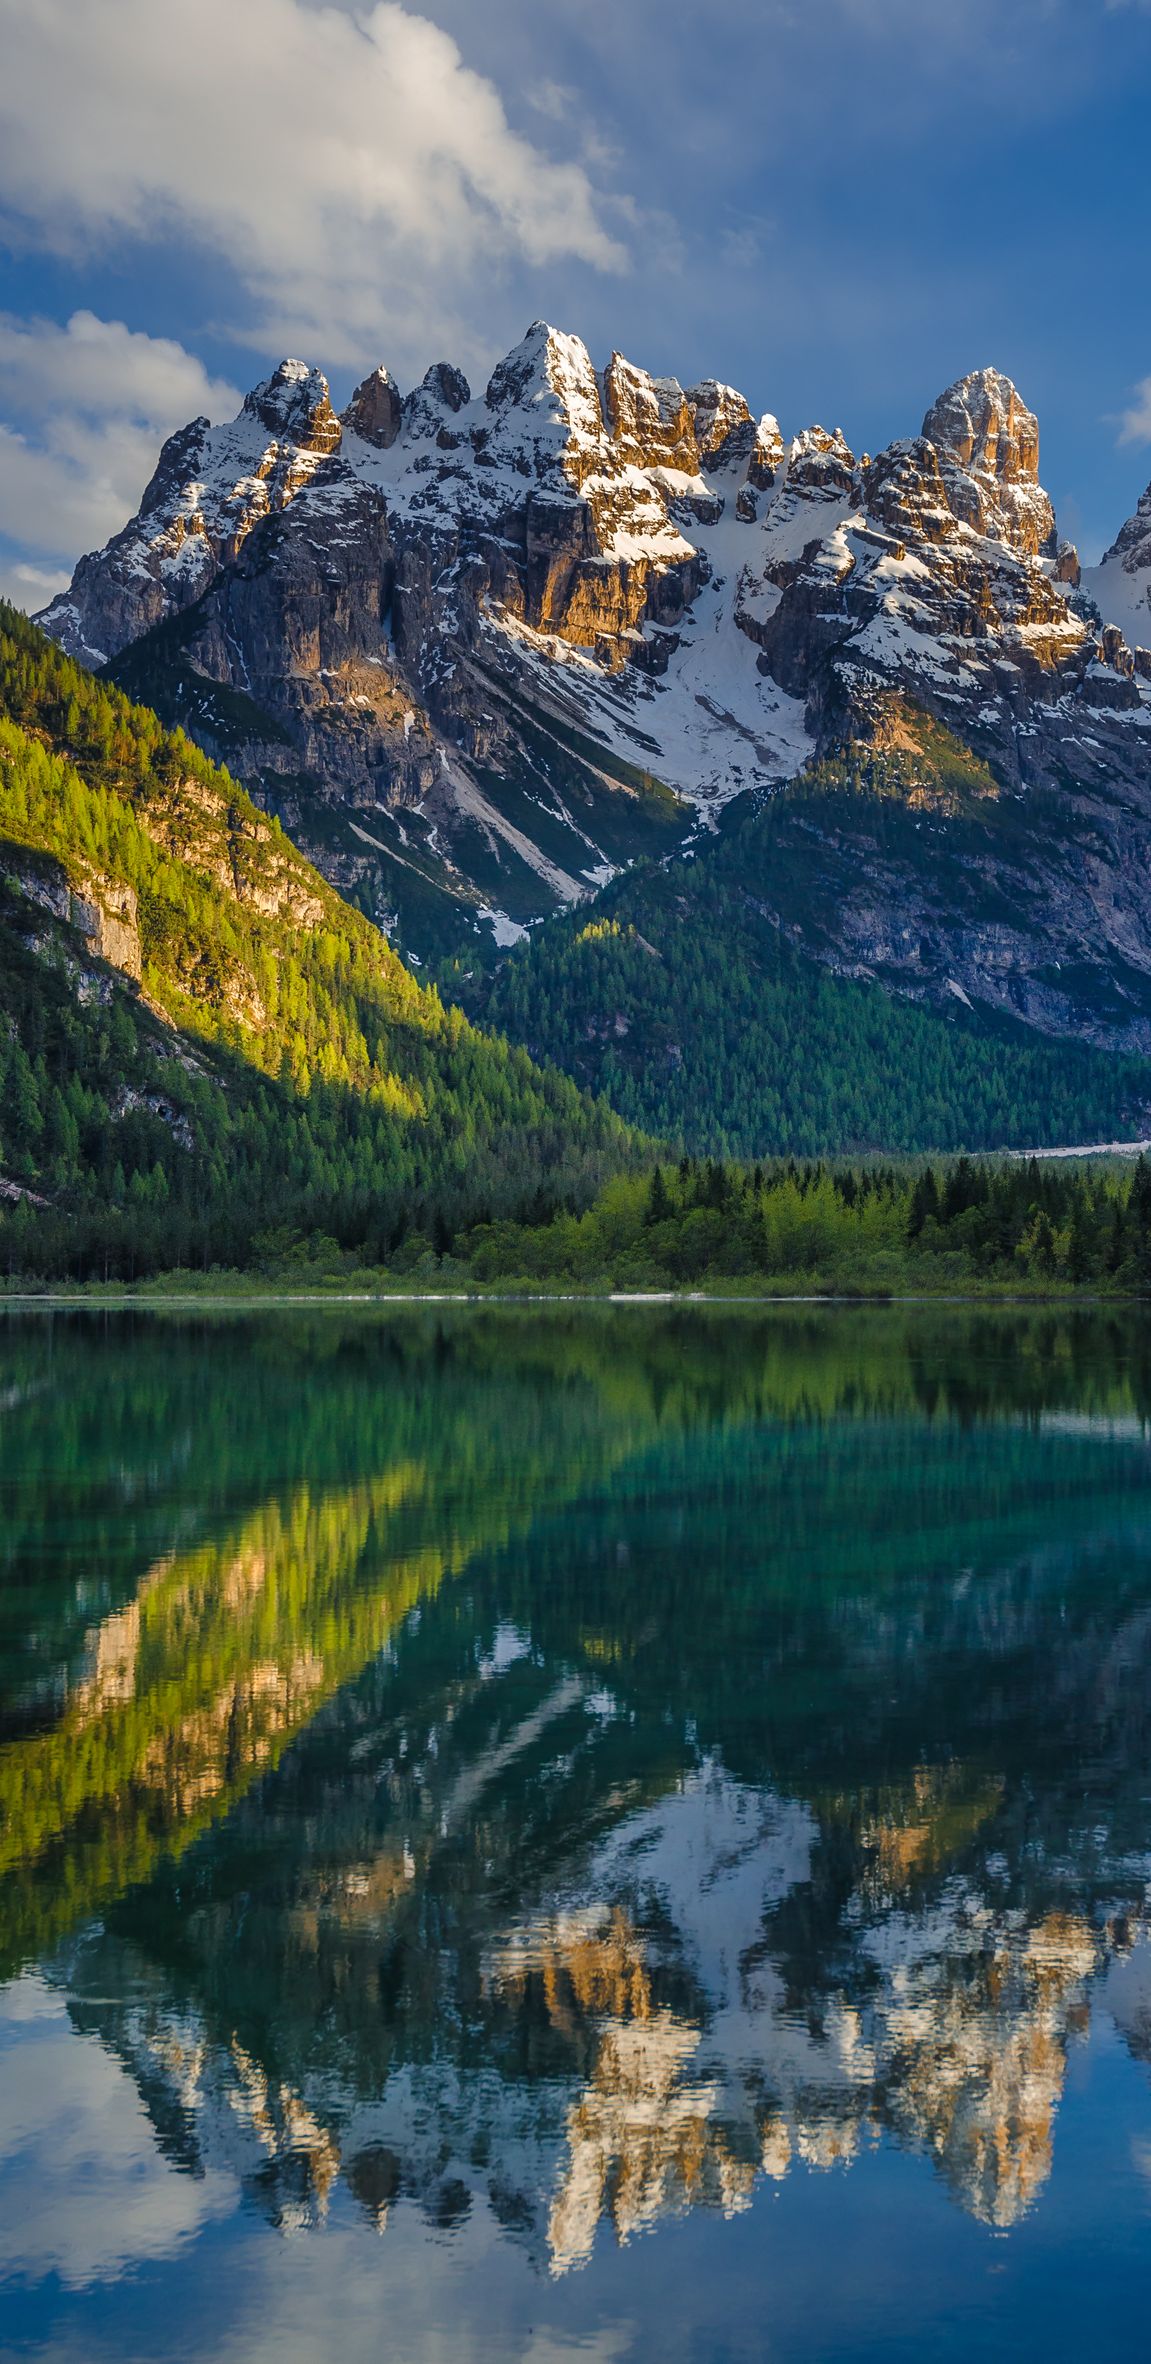 The Dolomites in northern italy, a beautiful lake